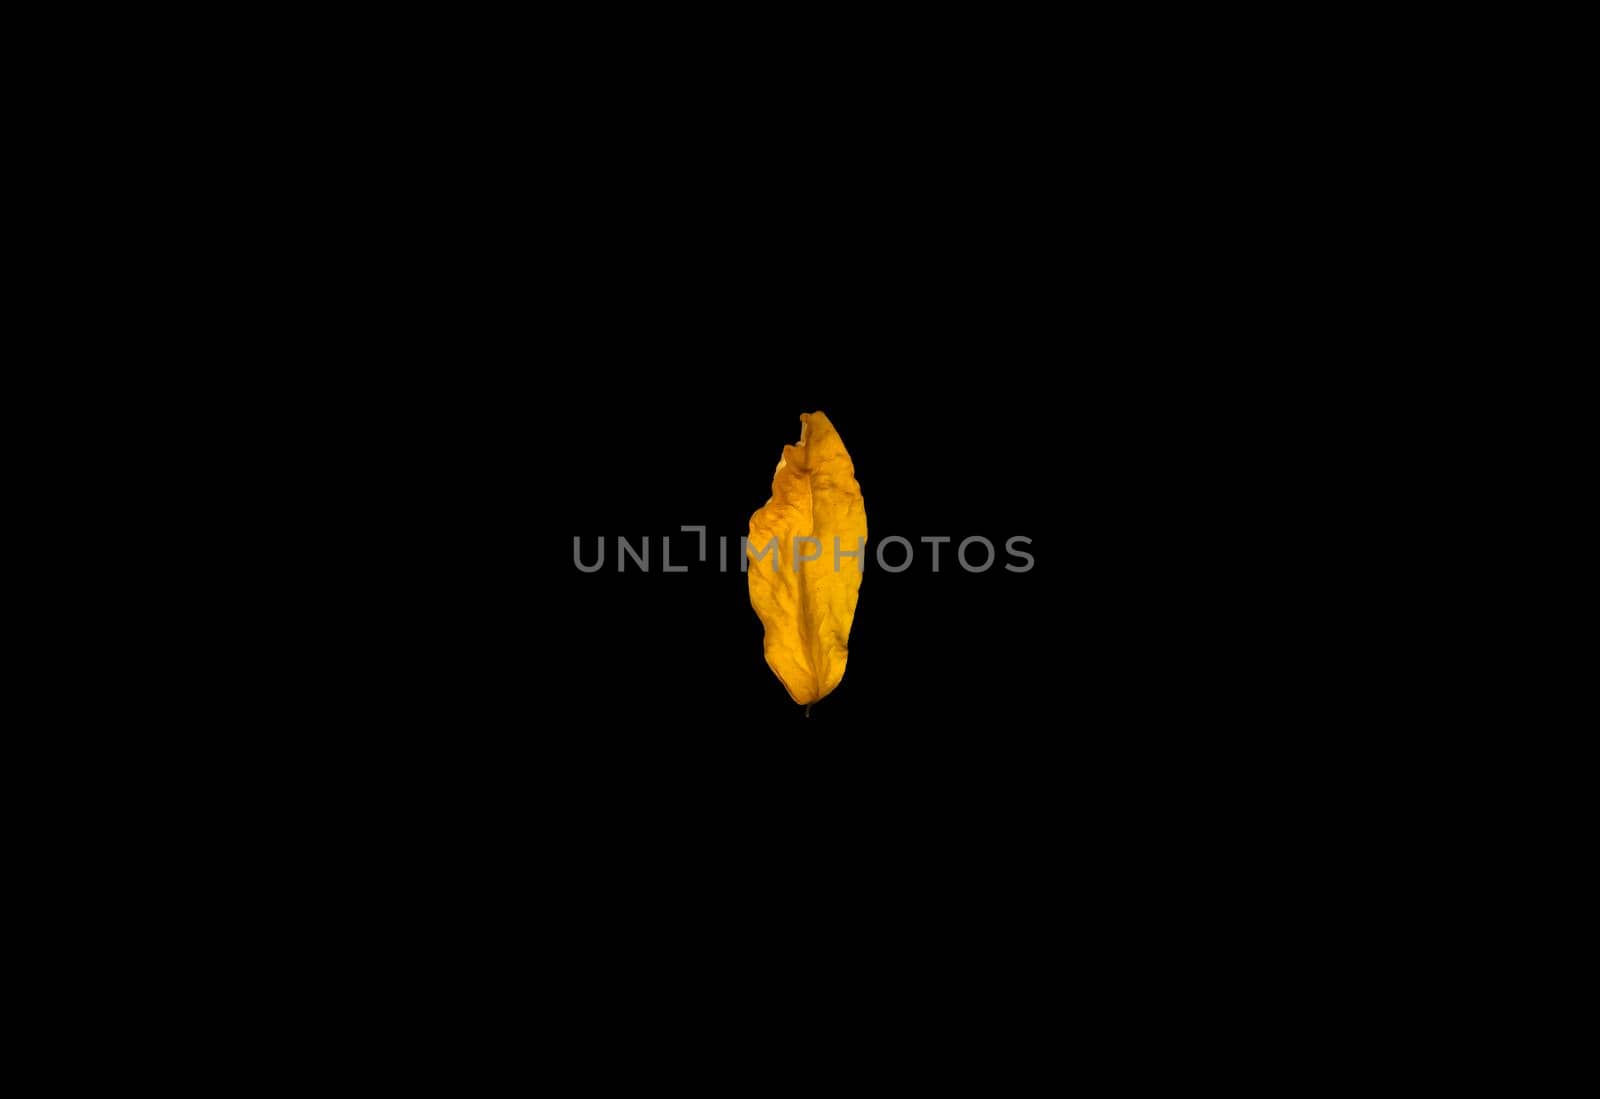 Yellow leaf, black background. Yellow leaf on black background, perfect view of stem, veins, texture and silhoutte by lunarts